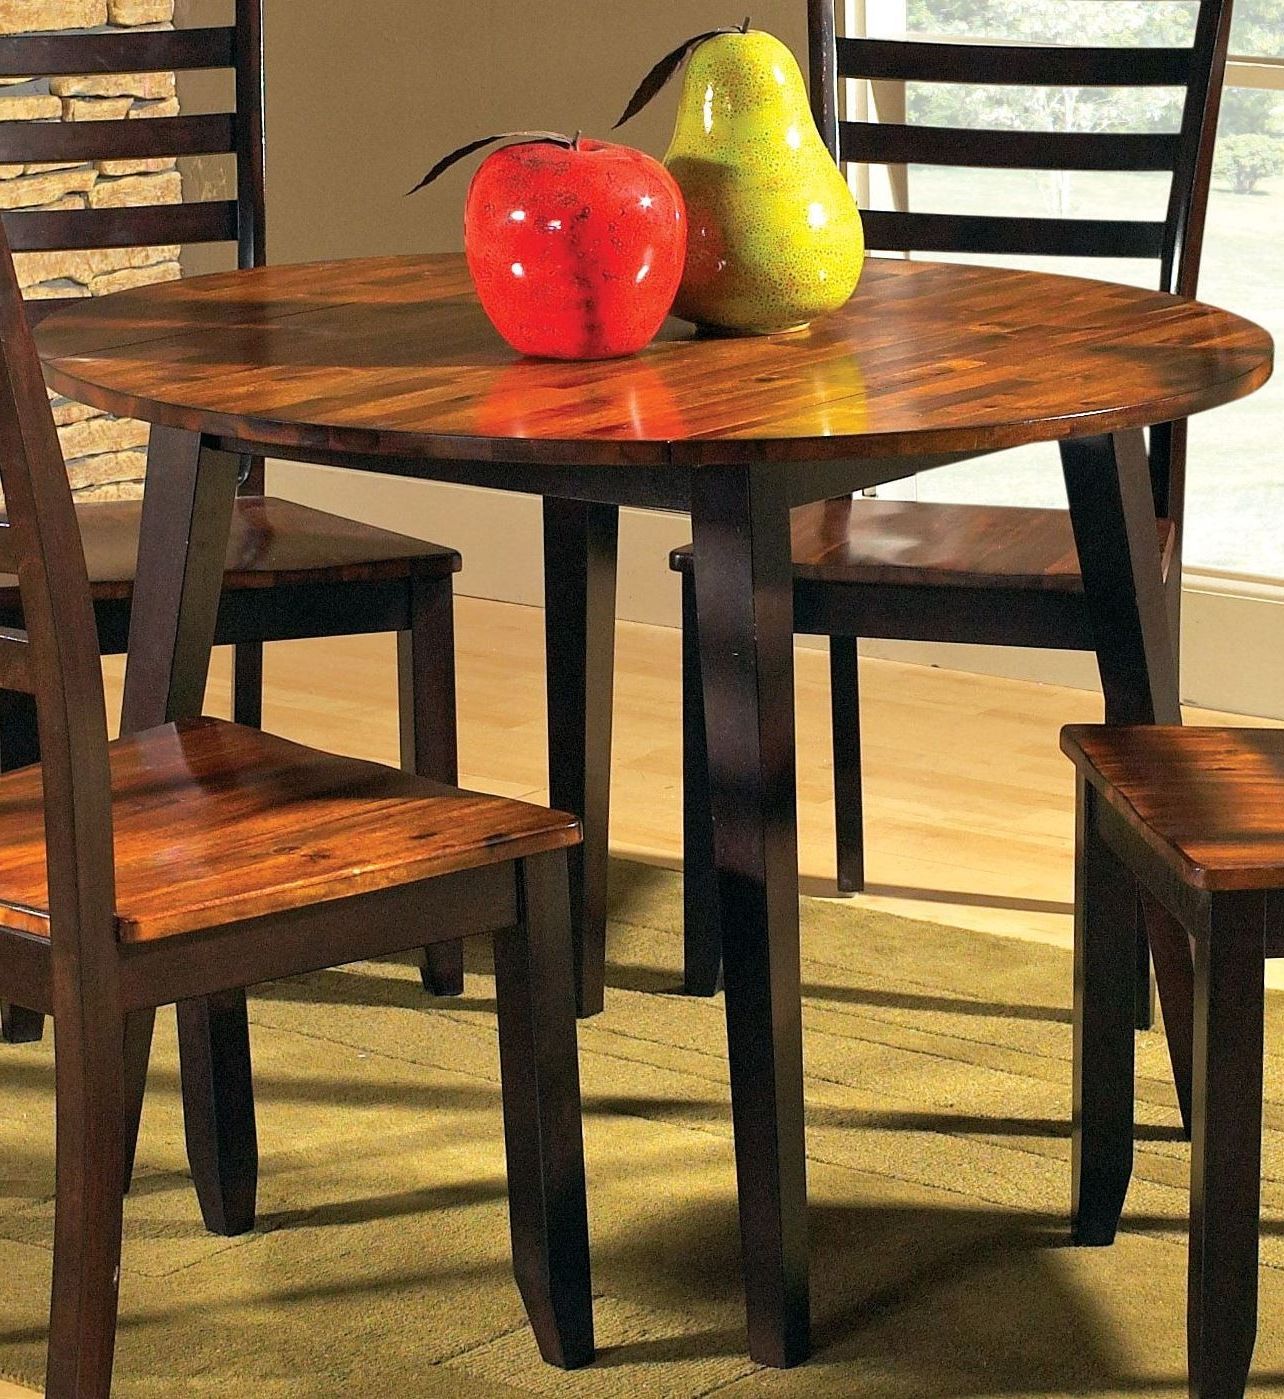 Abaco Cordovan Cherry Round Double Drop Leaf Dining Table Inside Well Known Adams Drop Leaf Trestle Dining Tables (View 5 of 20)